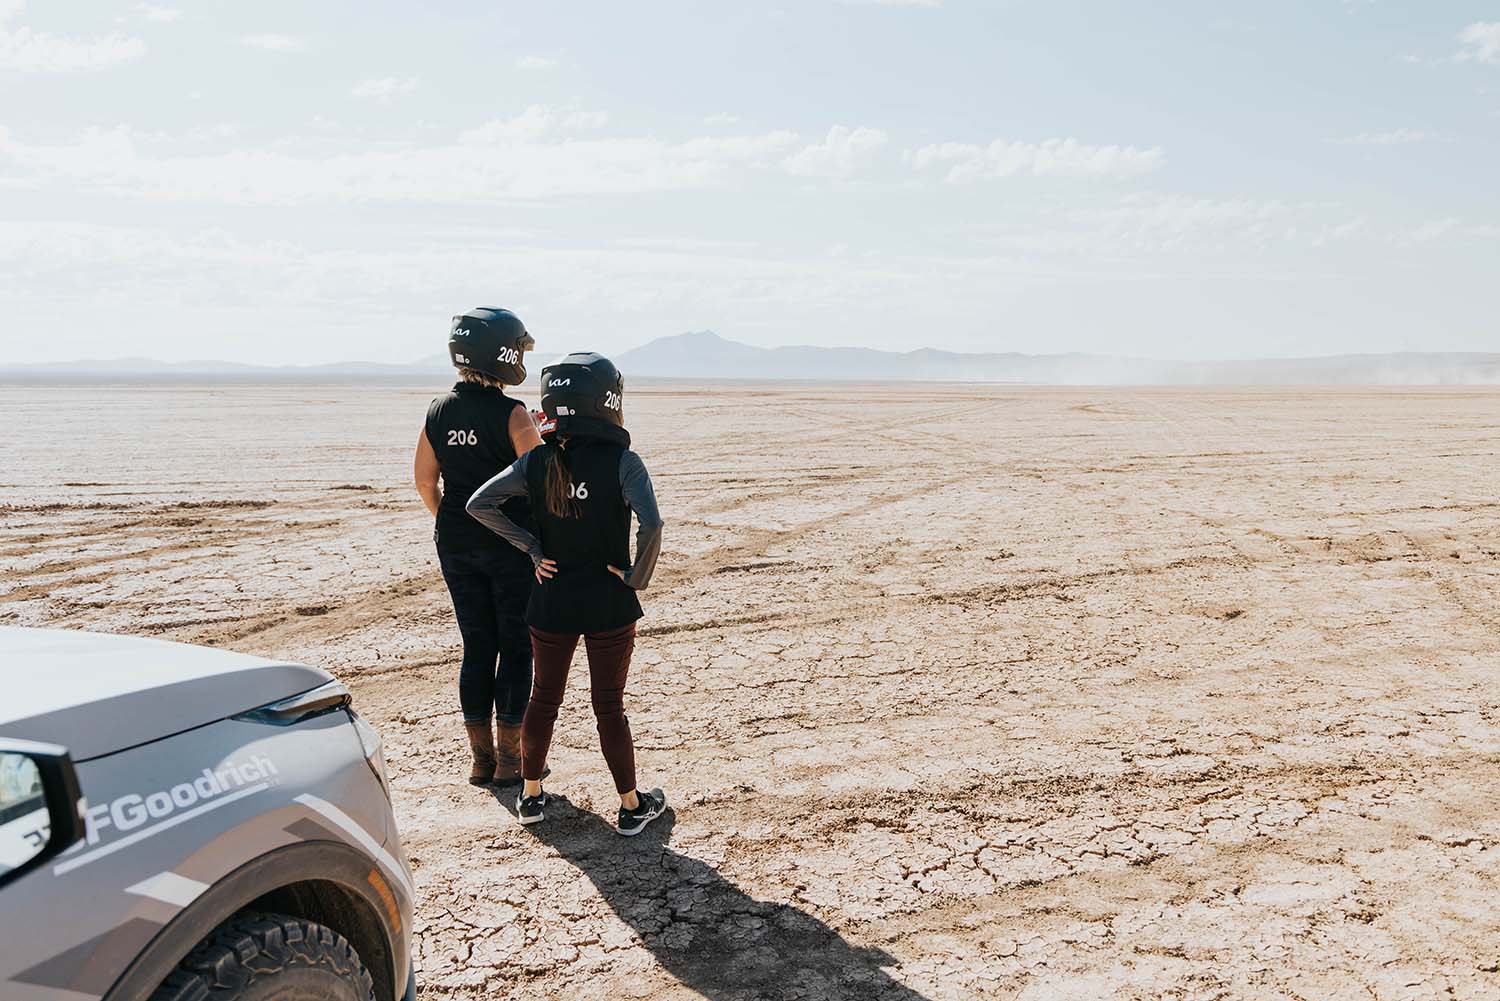 Two Rebelle Rally competitors look out at the desert